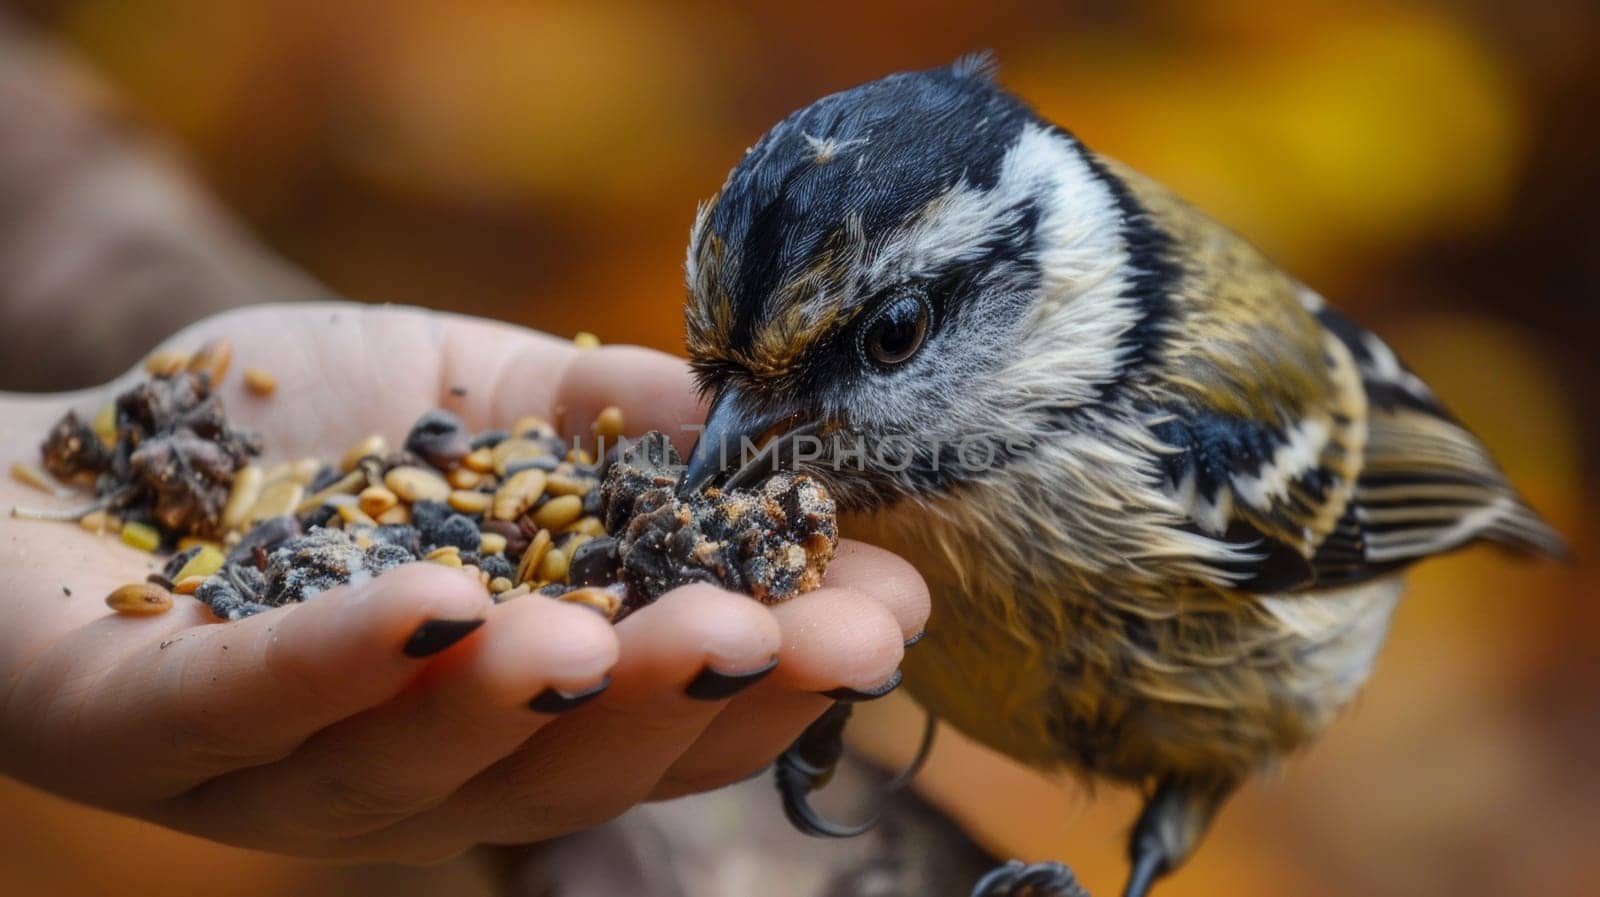 A bird is eating seeds from a person's hand